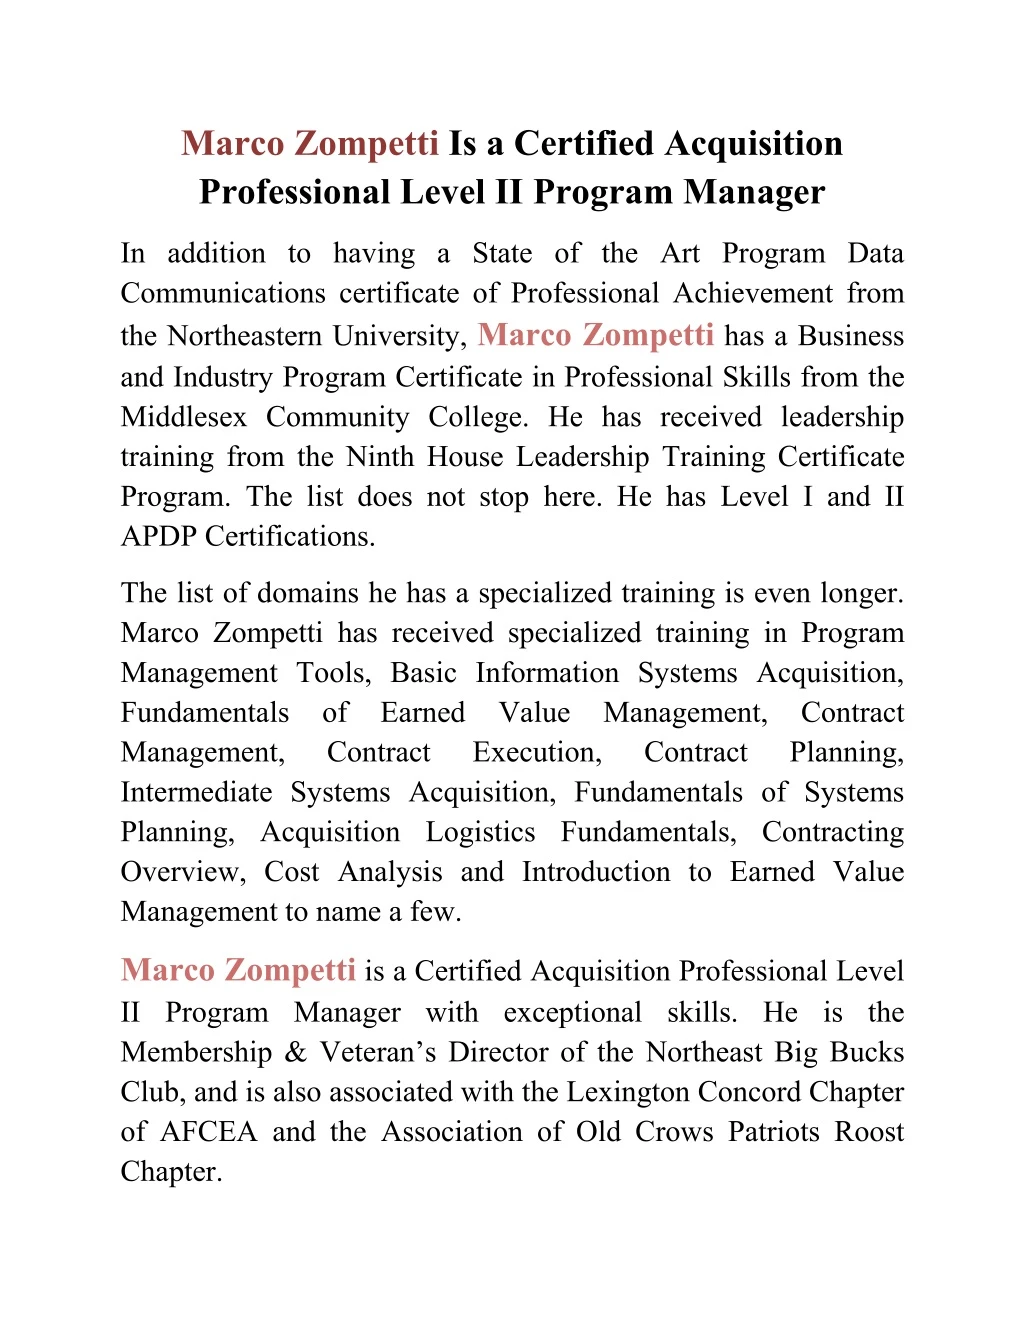 marco zompetti is a certified acquisition